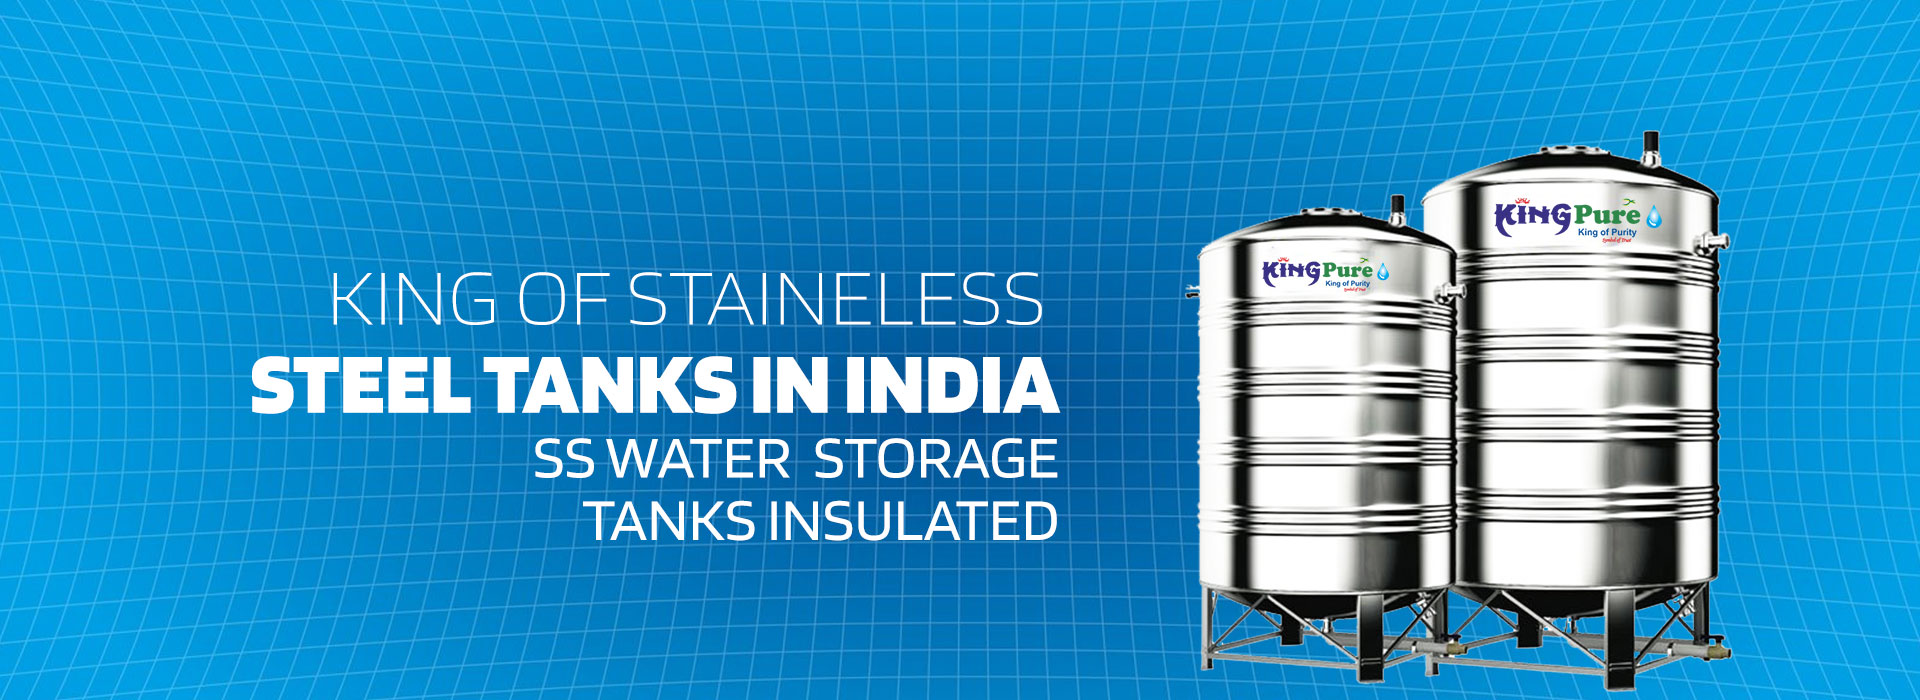 King of stainless steel tanks in india, ss water storage tanks insulated